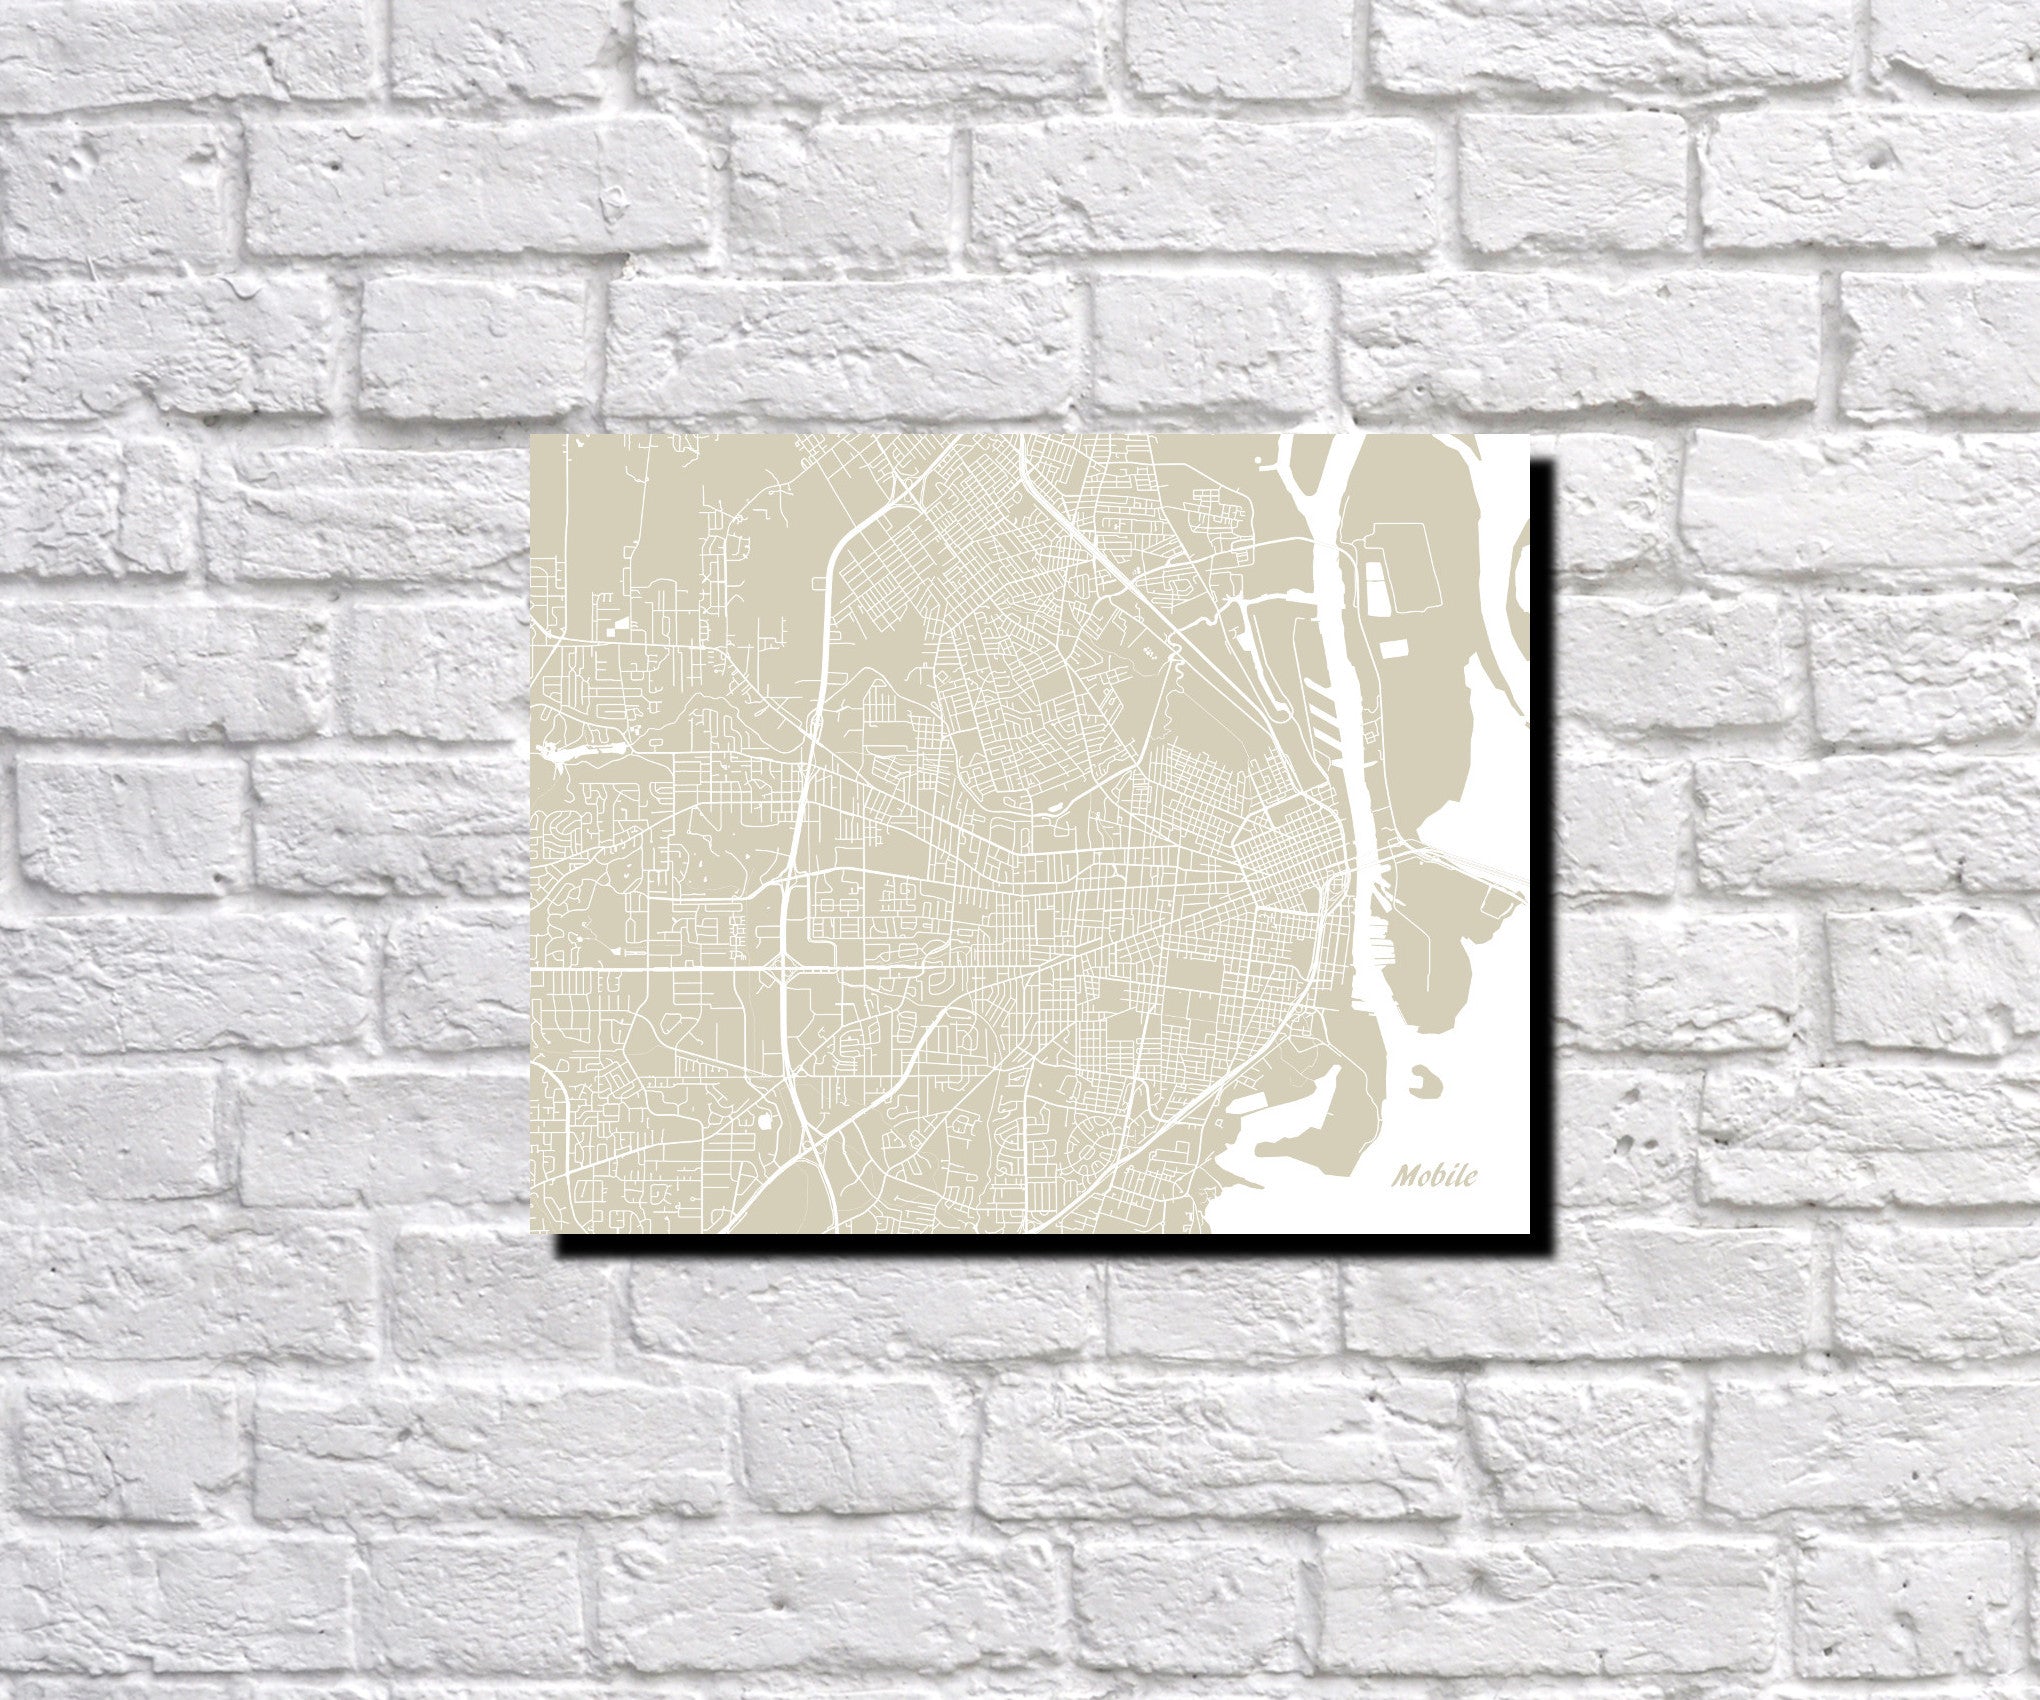 Mobile, Alabama City Street Map Print Feature Wall Art Poster